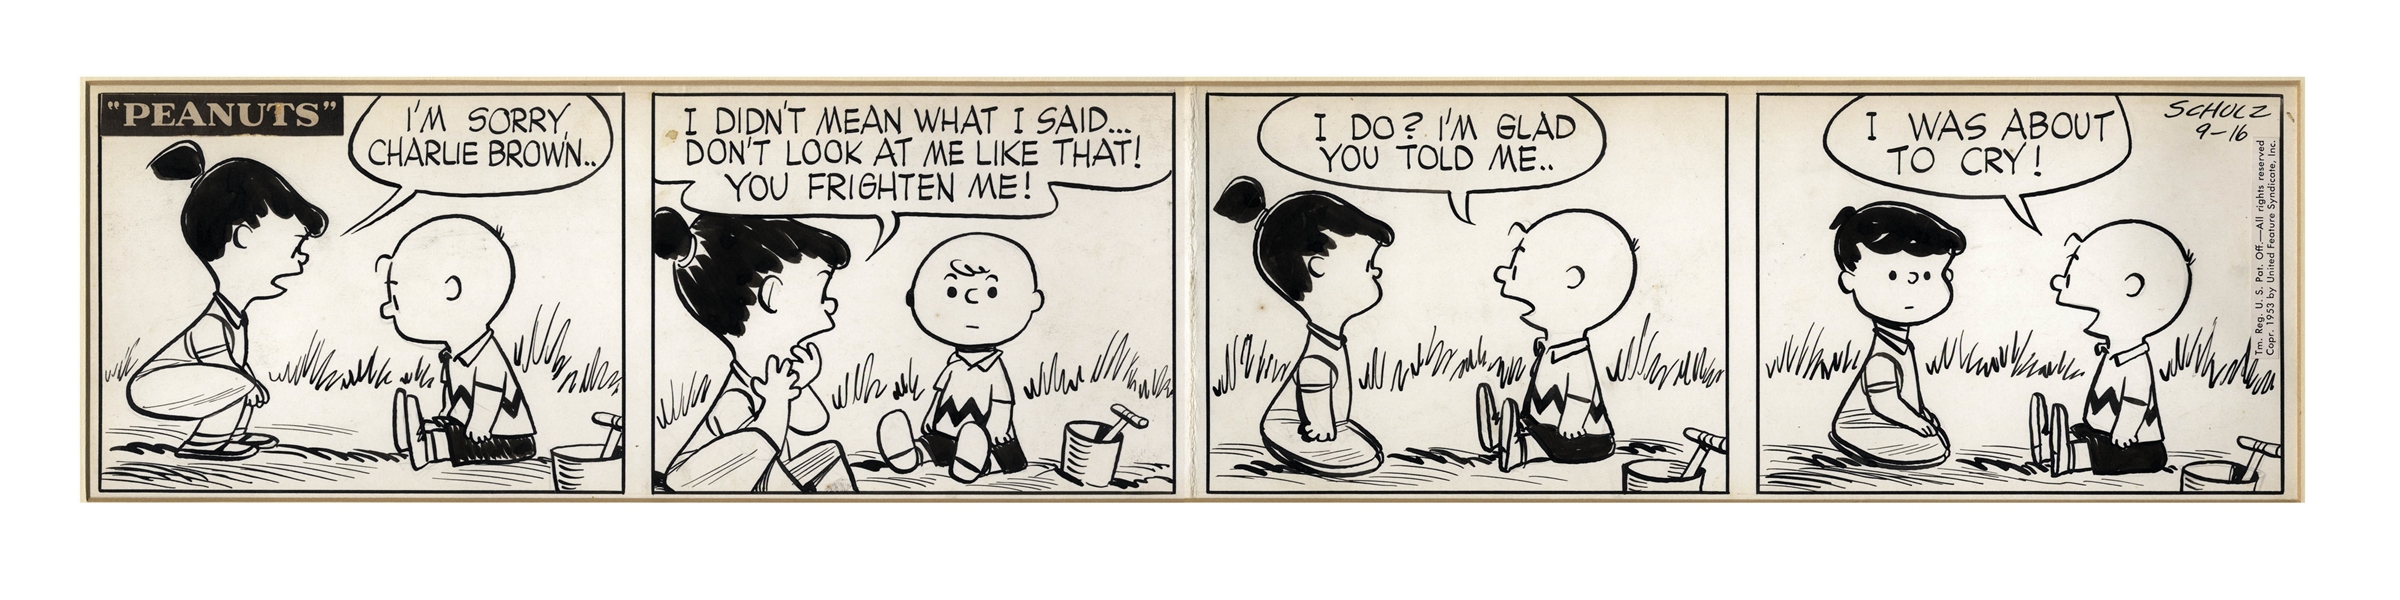 Charles Schulz Hand-Drawn ''Peanuts'' Comic Strip From 1953 -- In this Early Strip, Violet Is Afraid She's Gone Too Far in Antagonizing Charlie Brown